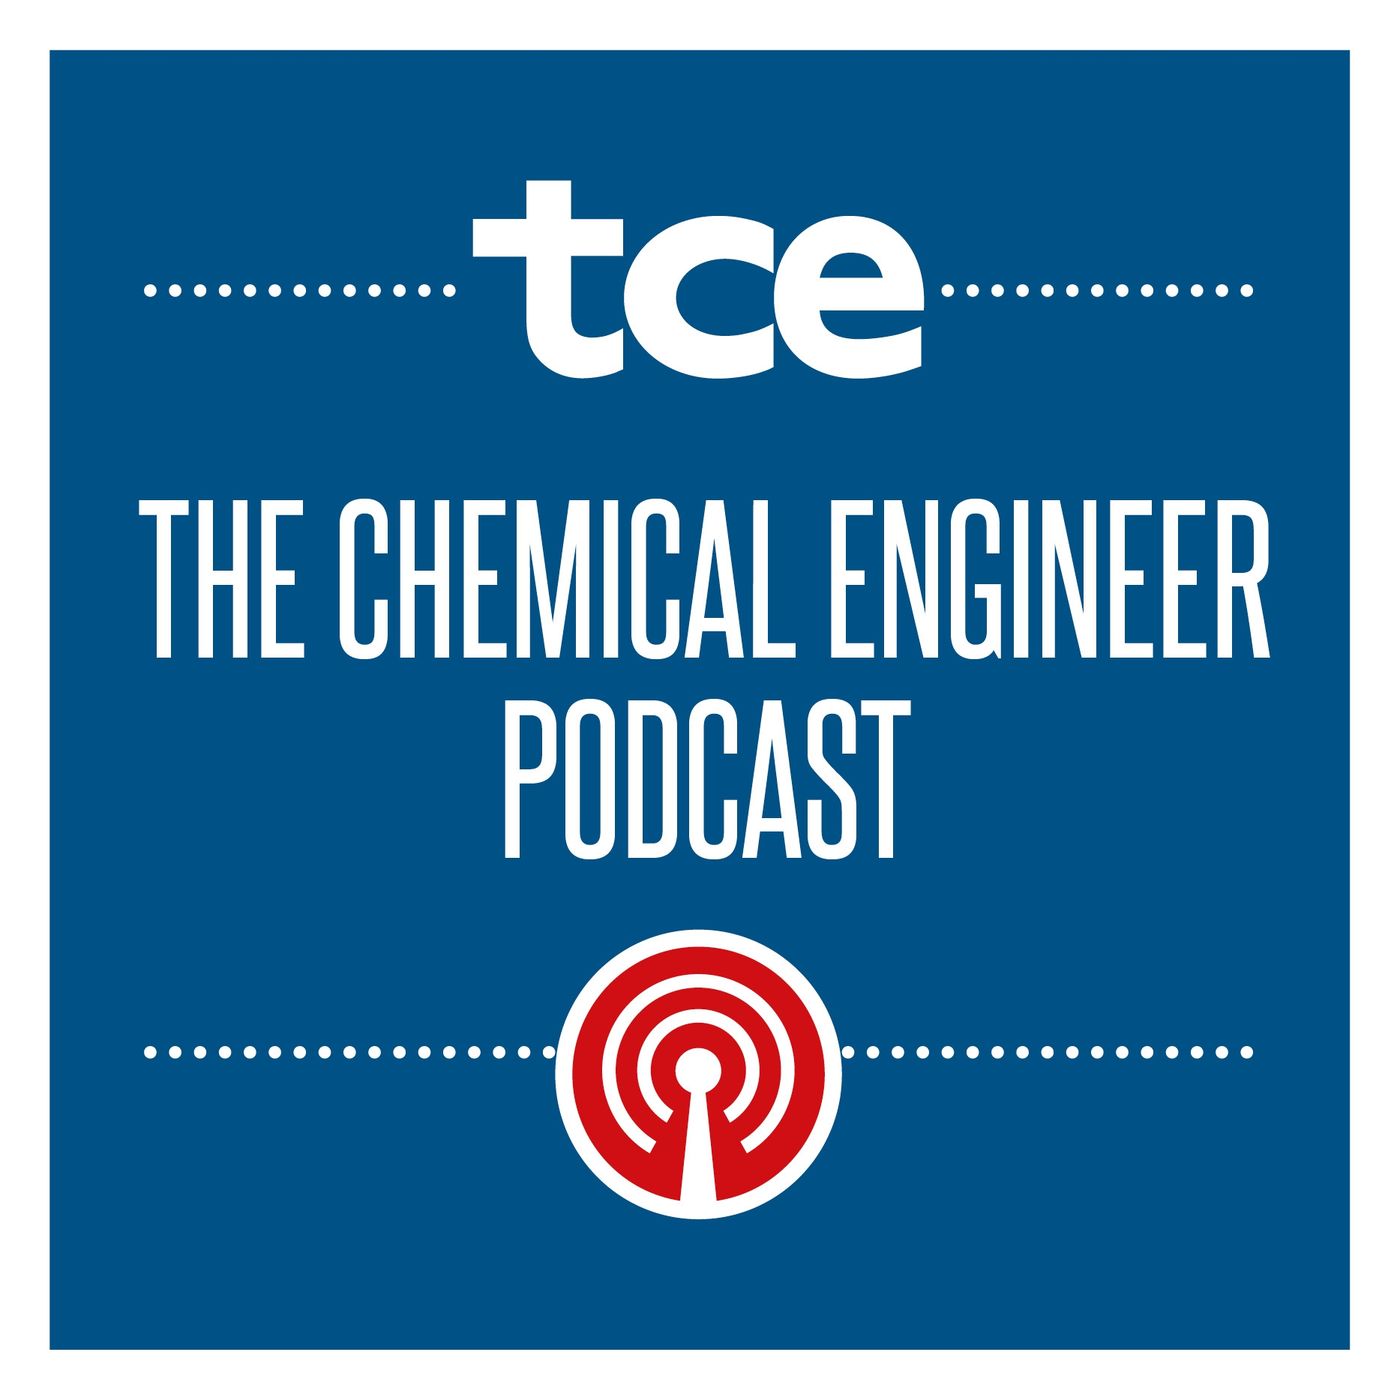 thechemicalengineer